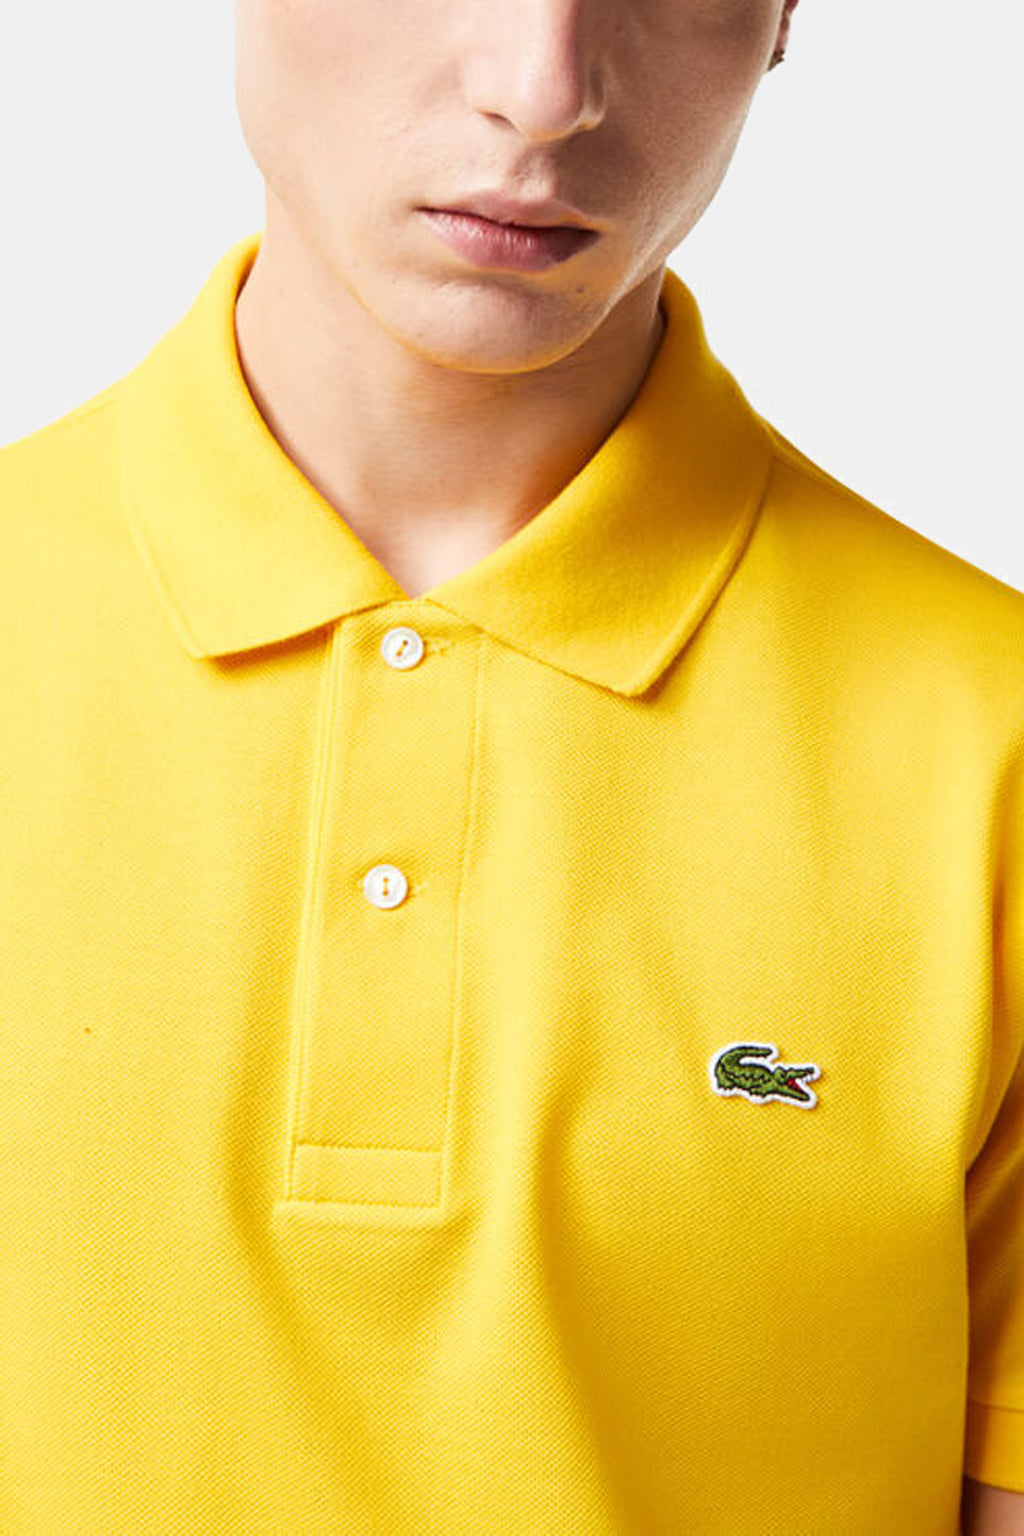 Lacoste - Classic Fit L.12.12 Polo Shirt